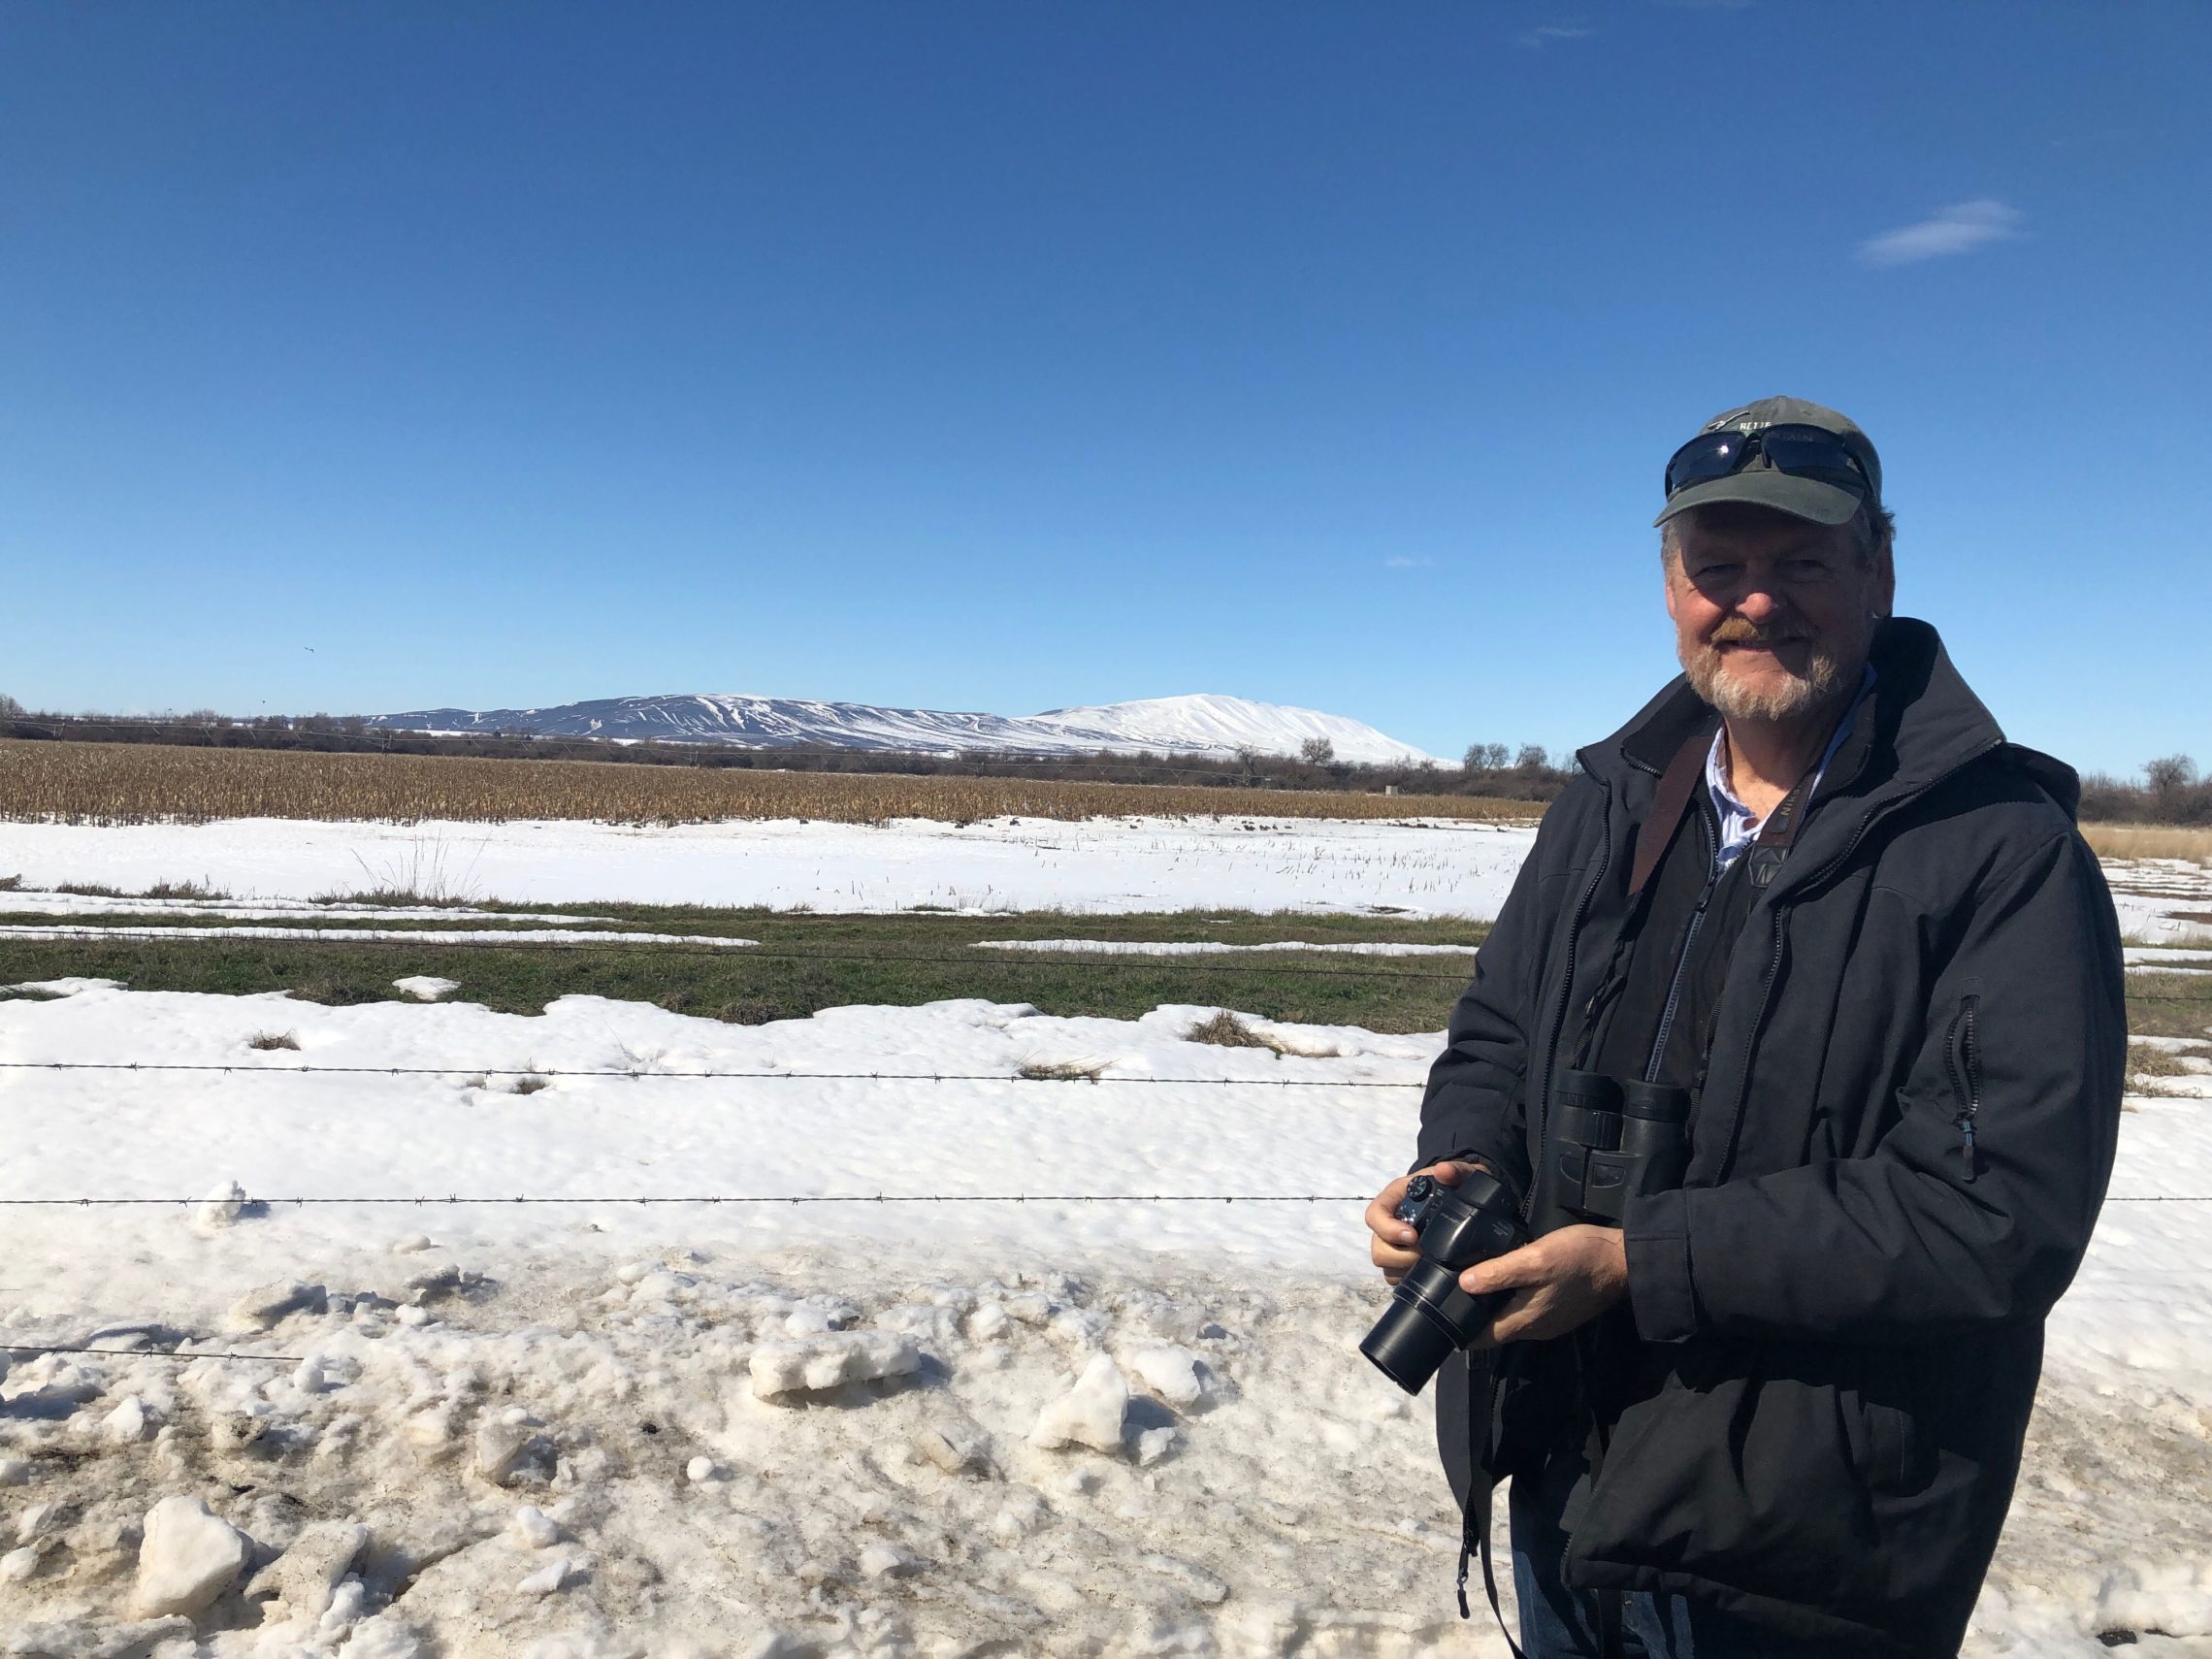 Mike Denny, an avid birder from College Place, Wash., scouts out a group of migrating lesser sandhill cranes near Richland. He’s worried the lingering snow is making life difficult for the travelers who need to refuel for their continued journey to Alaska. CREDIT: ANNA KING/N3